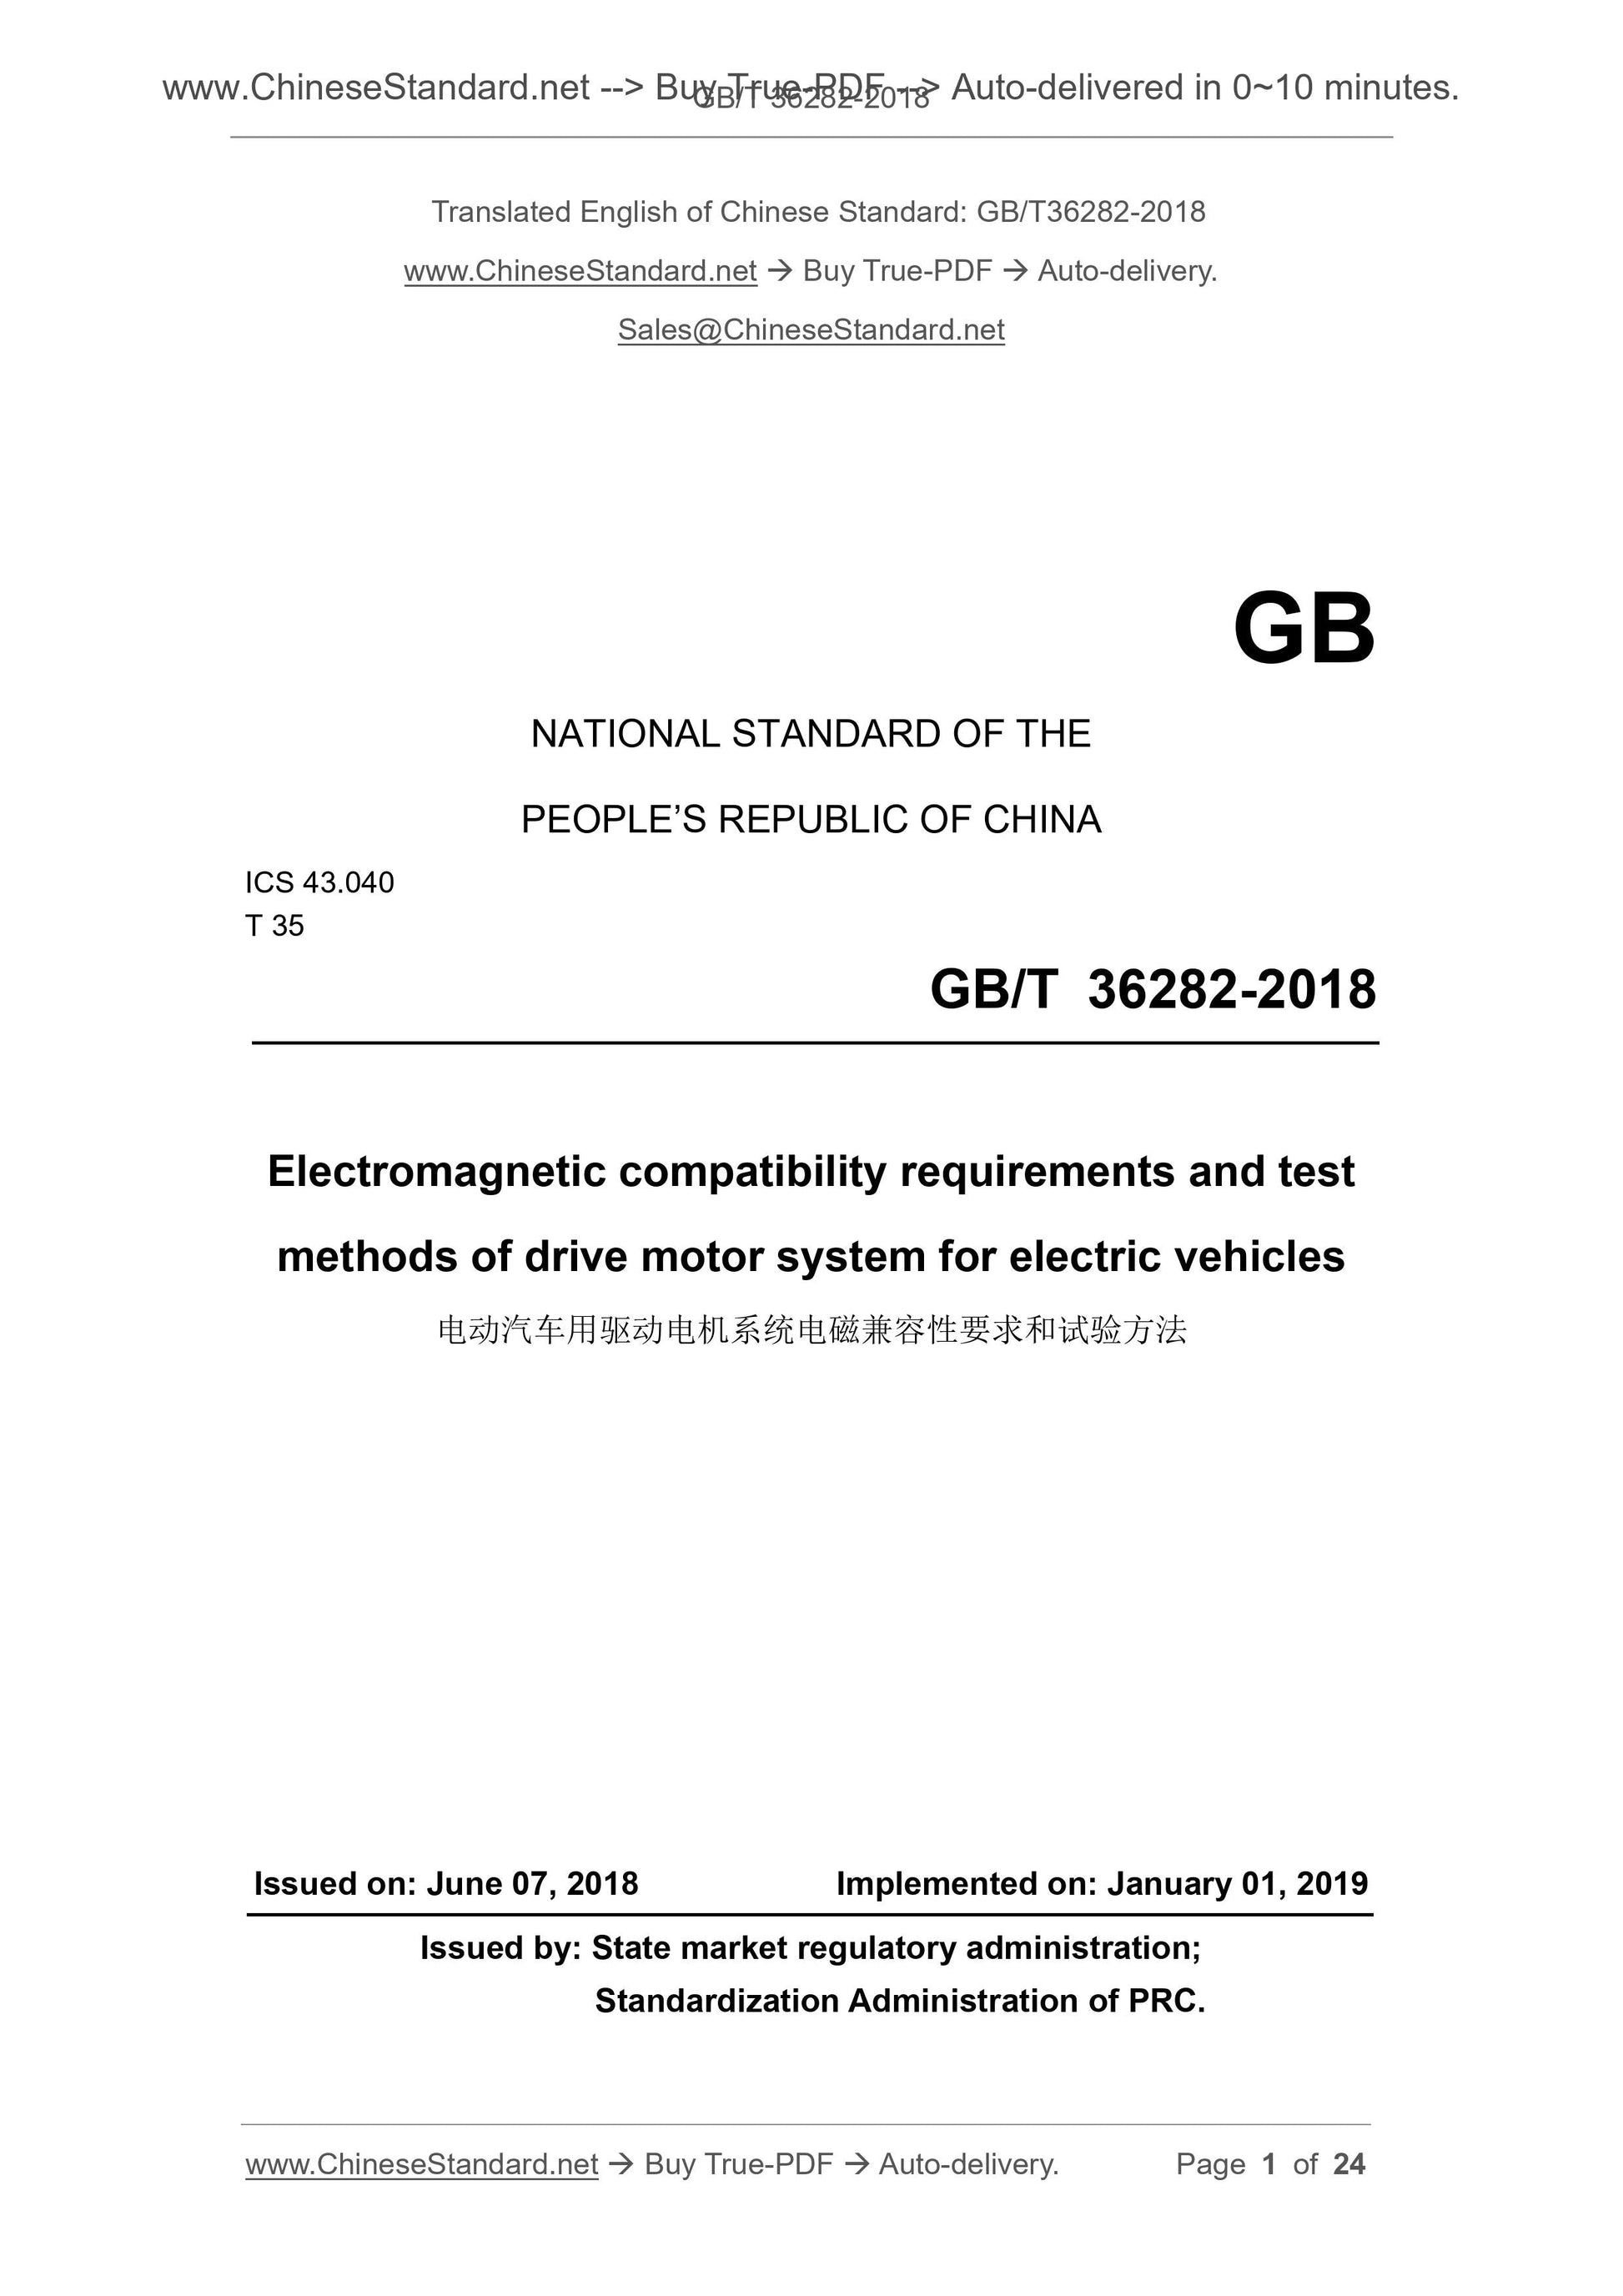 GB/T 36282-2018 Page 1